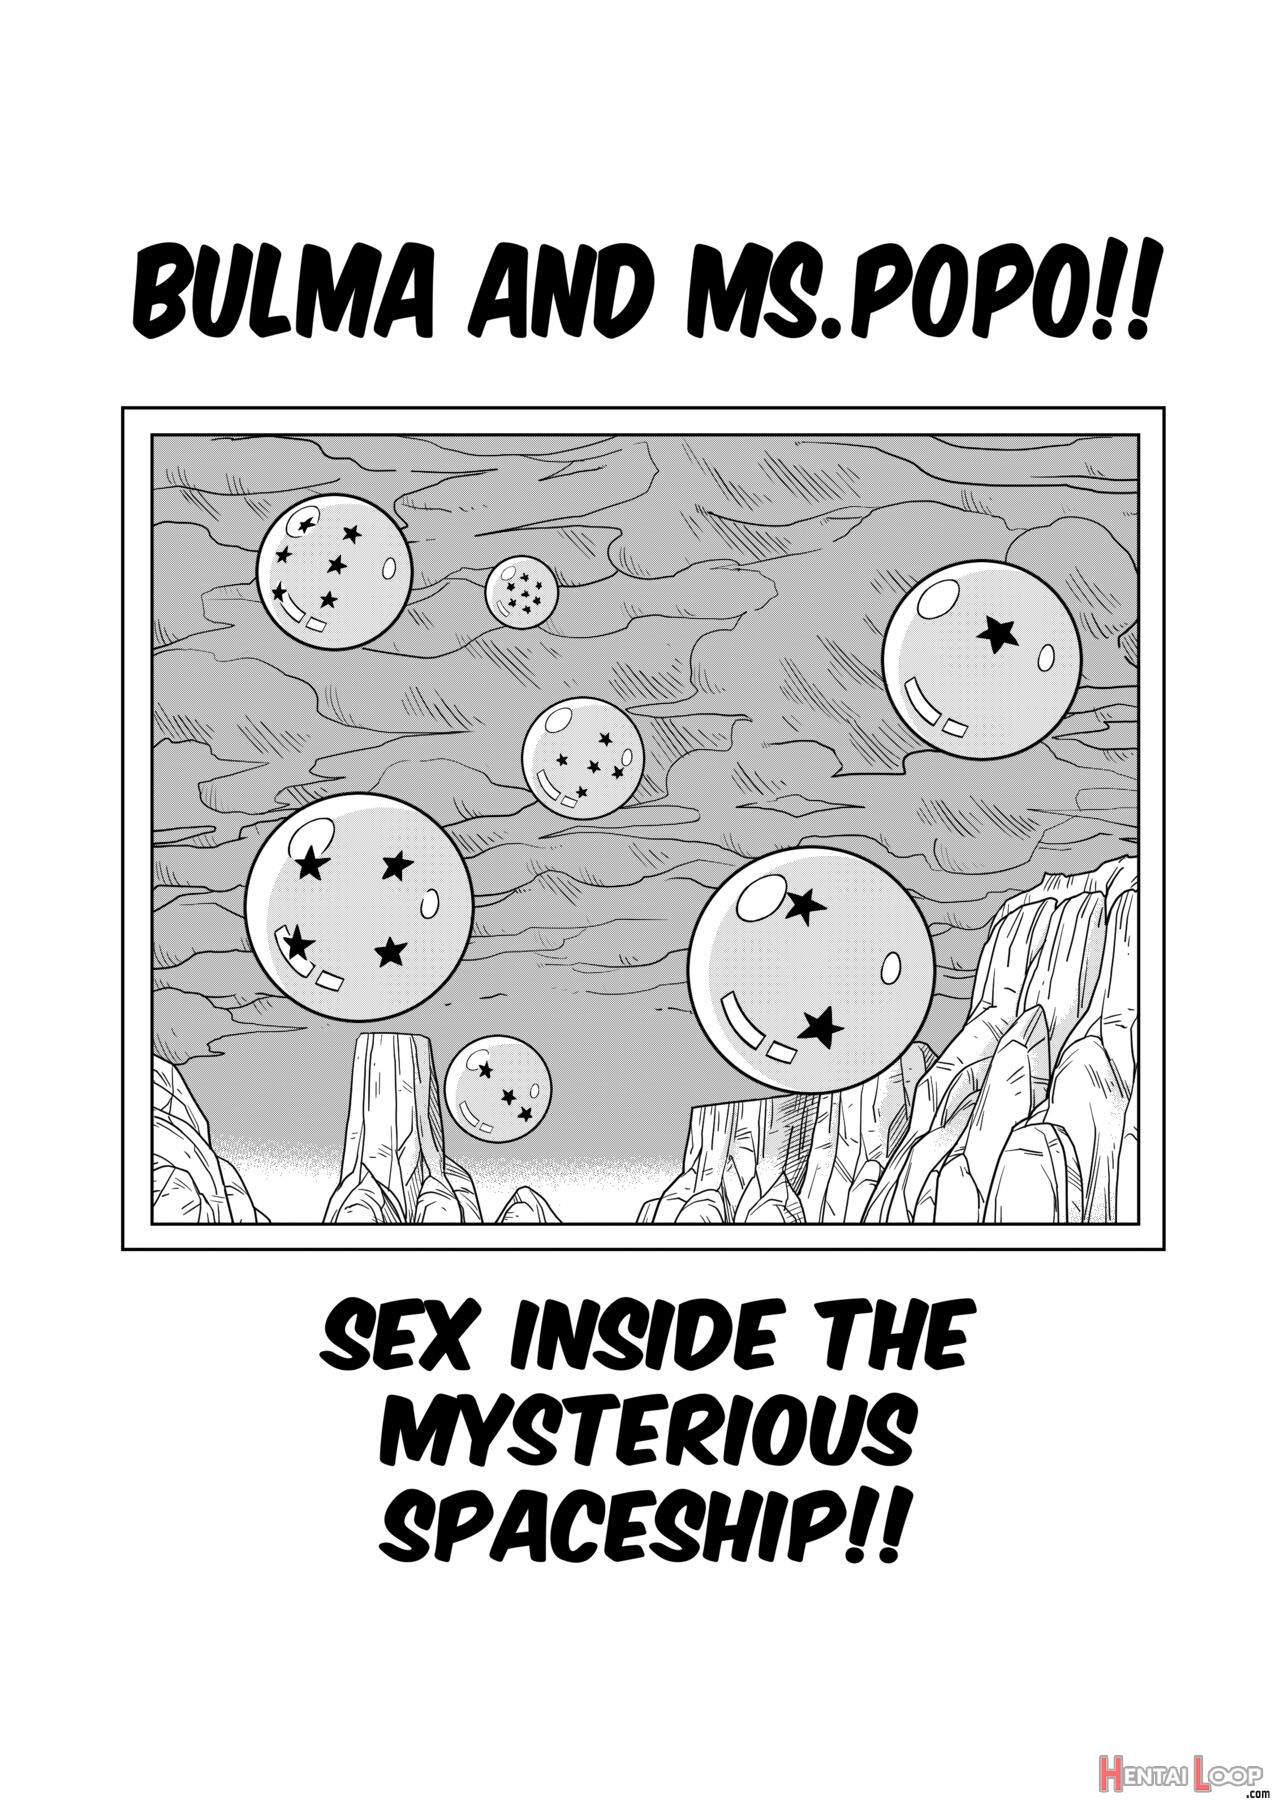 Dagon Ball - Bulma Meets Mr.popo - Sex Inside The Mysterious Spaceship! page 4